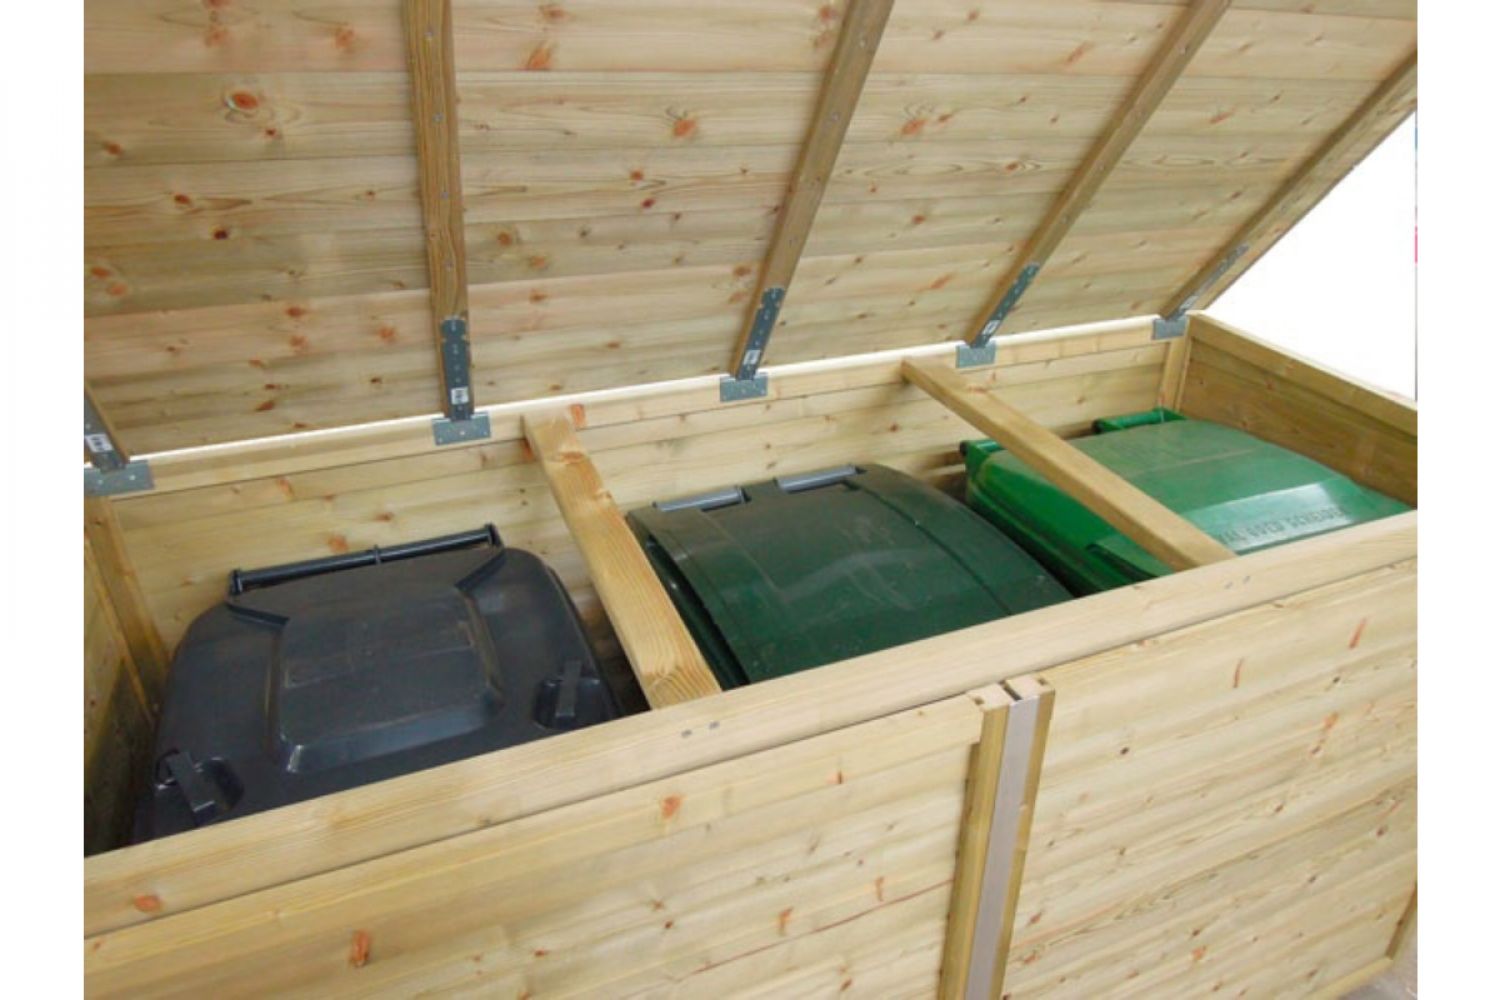 Containerberging 1x 140L en 2x 240L | 197x90x125 cm - voor 3 containers!